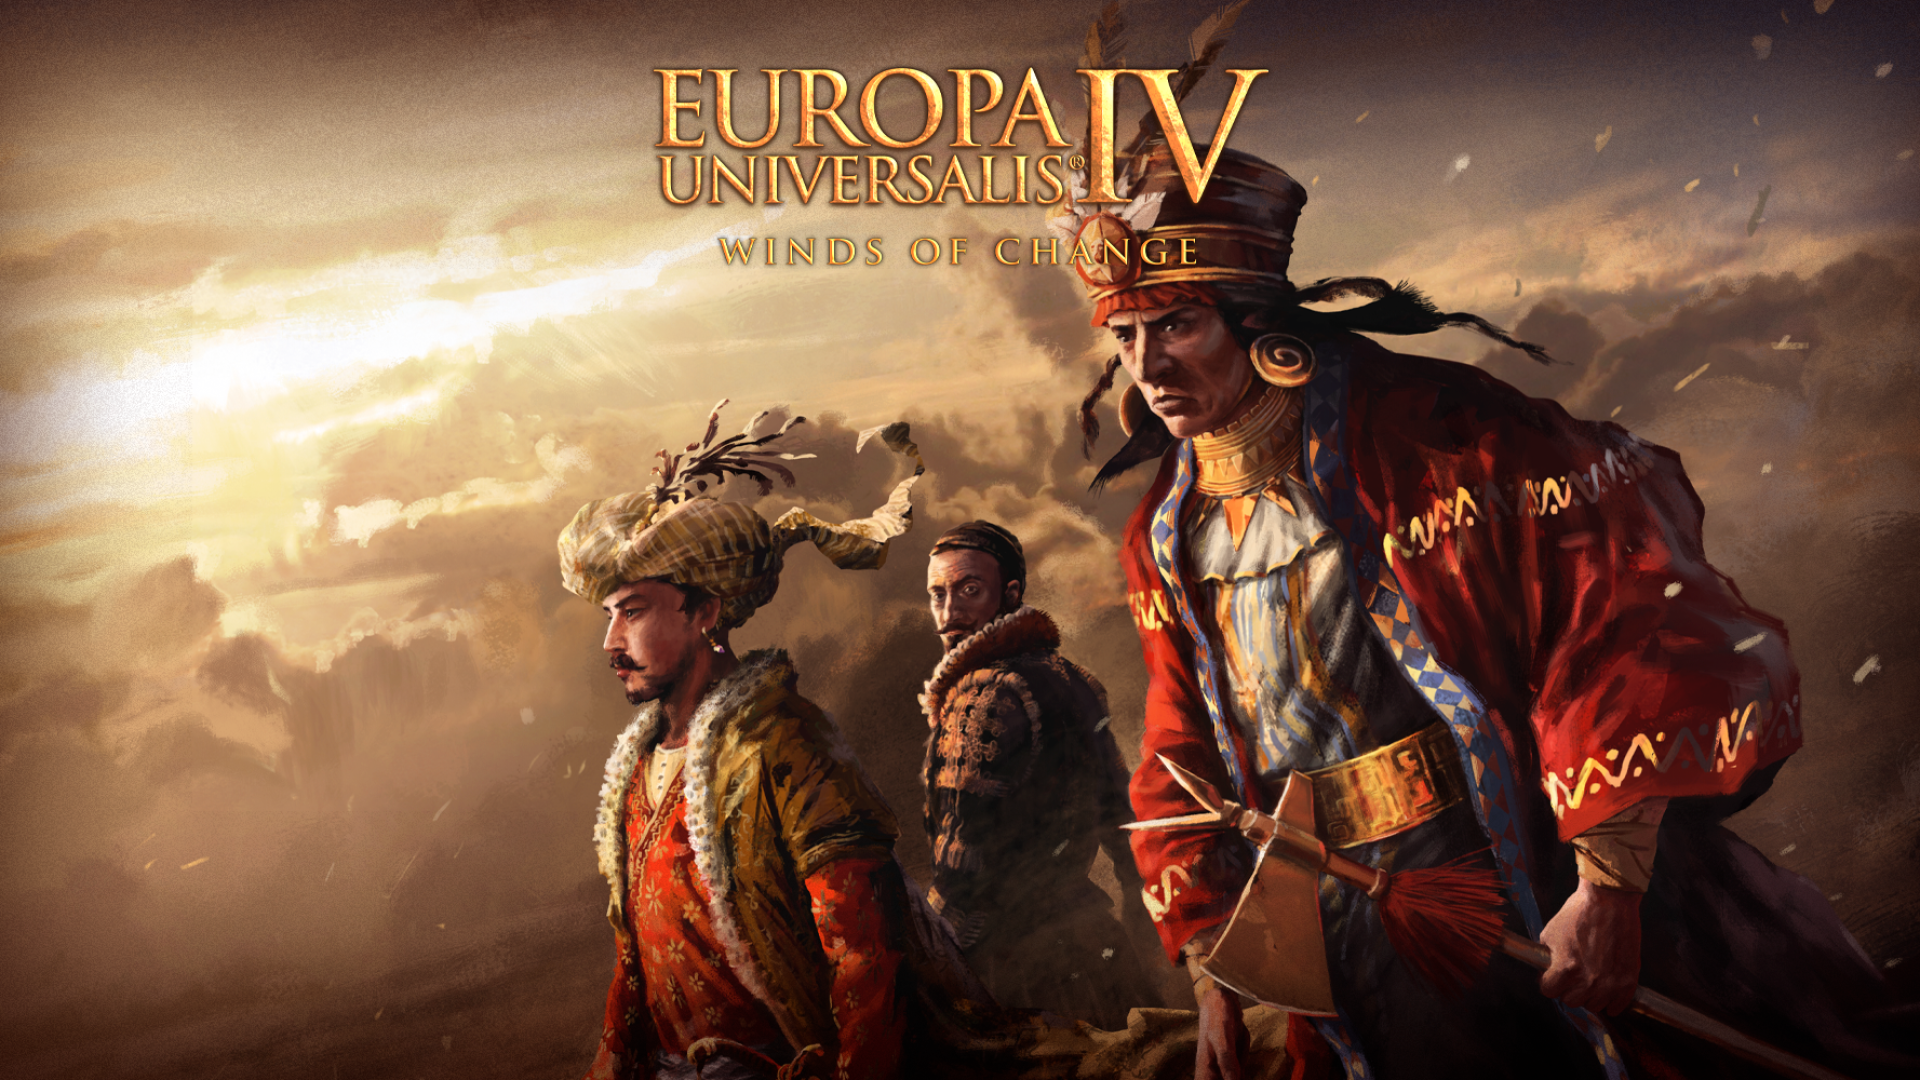 Europa Universalis IV: Winds of Change Available Now